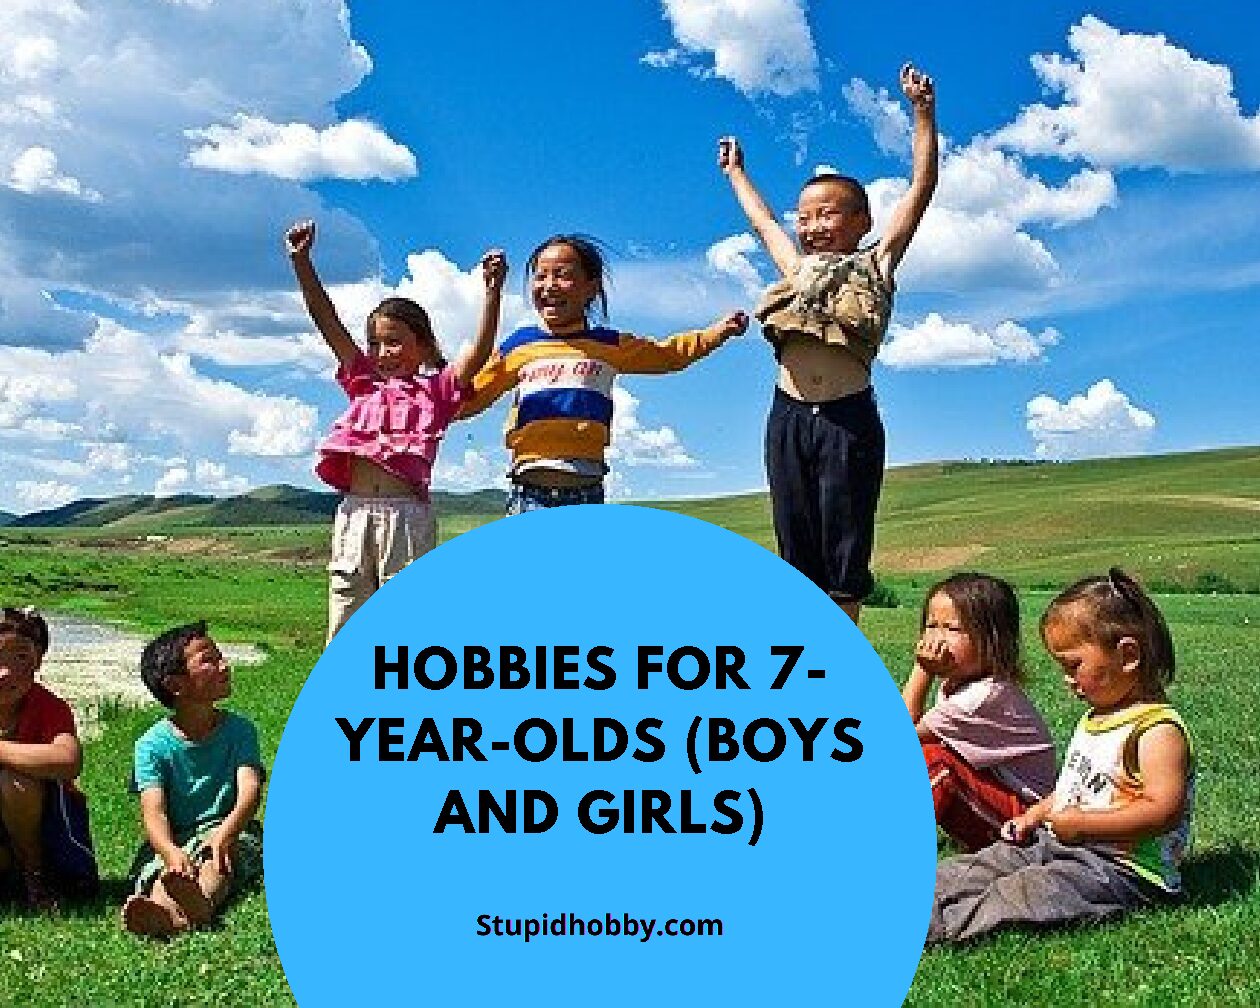 Hobbies For 7-Year-Olds (Boys and Girls)